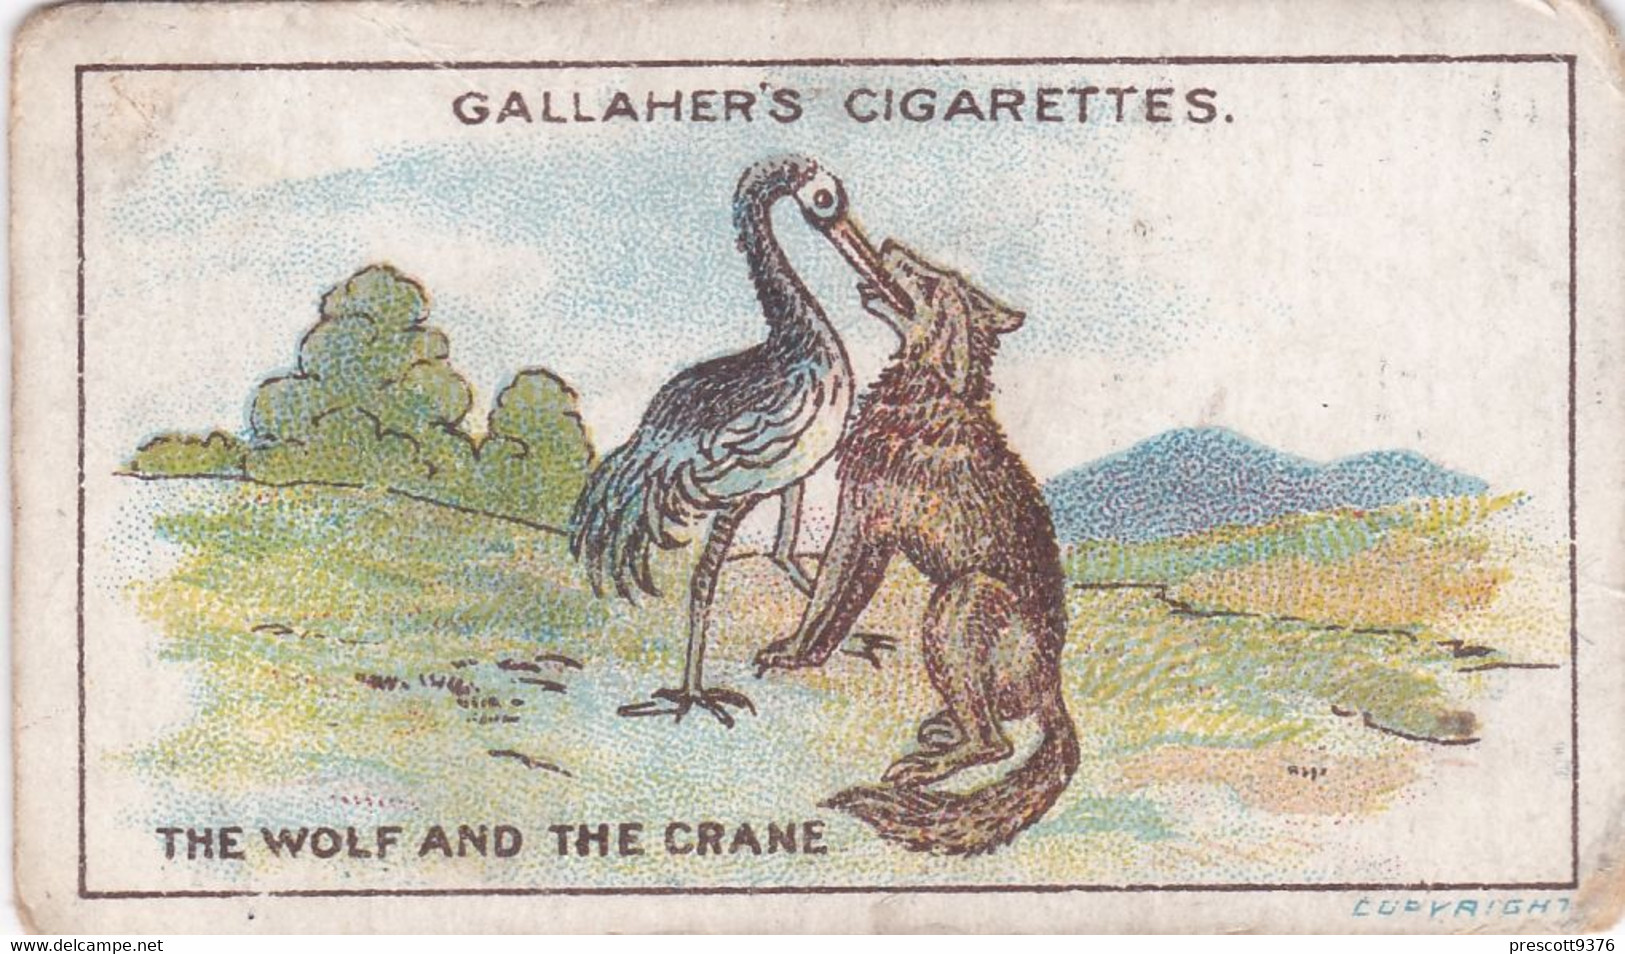 69 The Wolf & The Crane, Fables & Their Morals 1922  - Gallaher Cigarette Card - Original - Antique - Gallaher